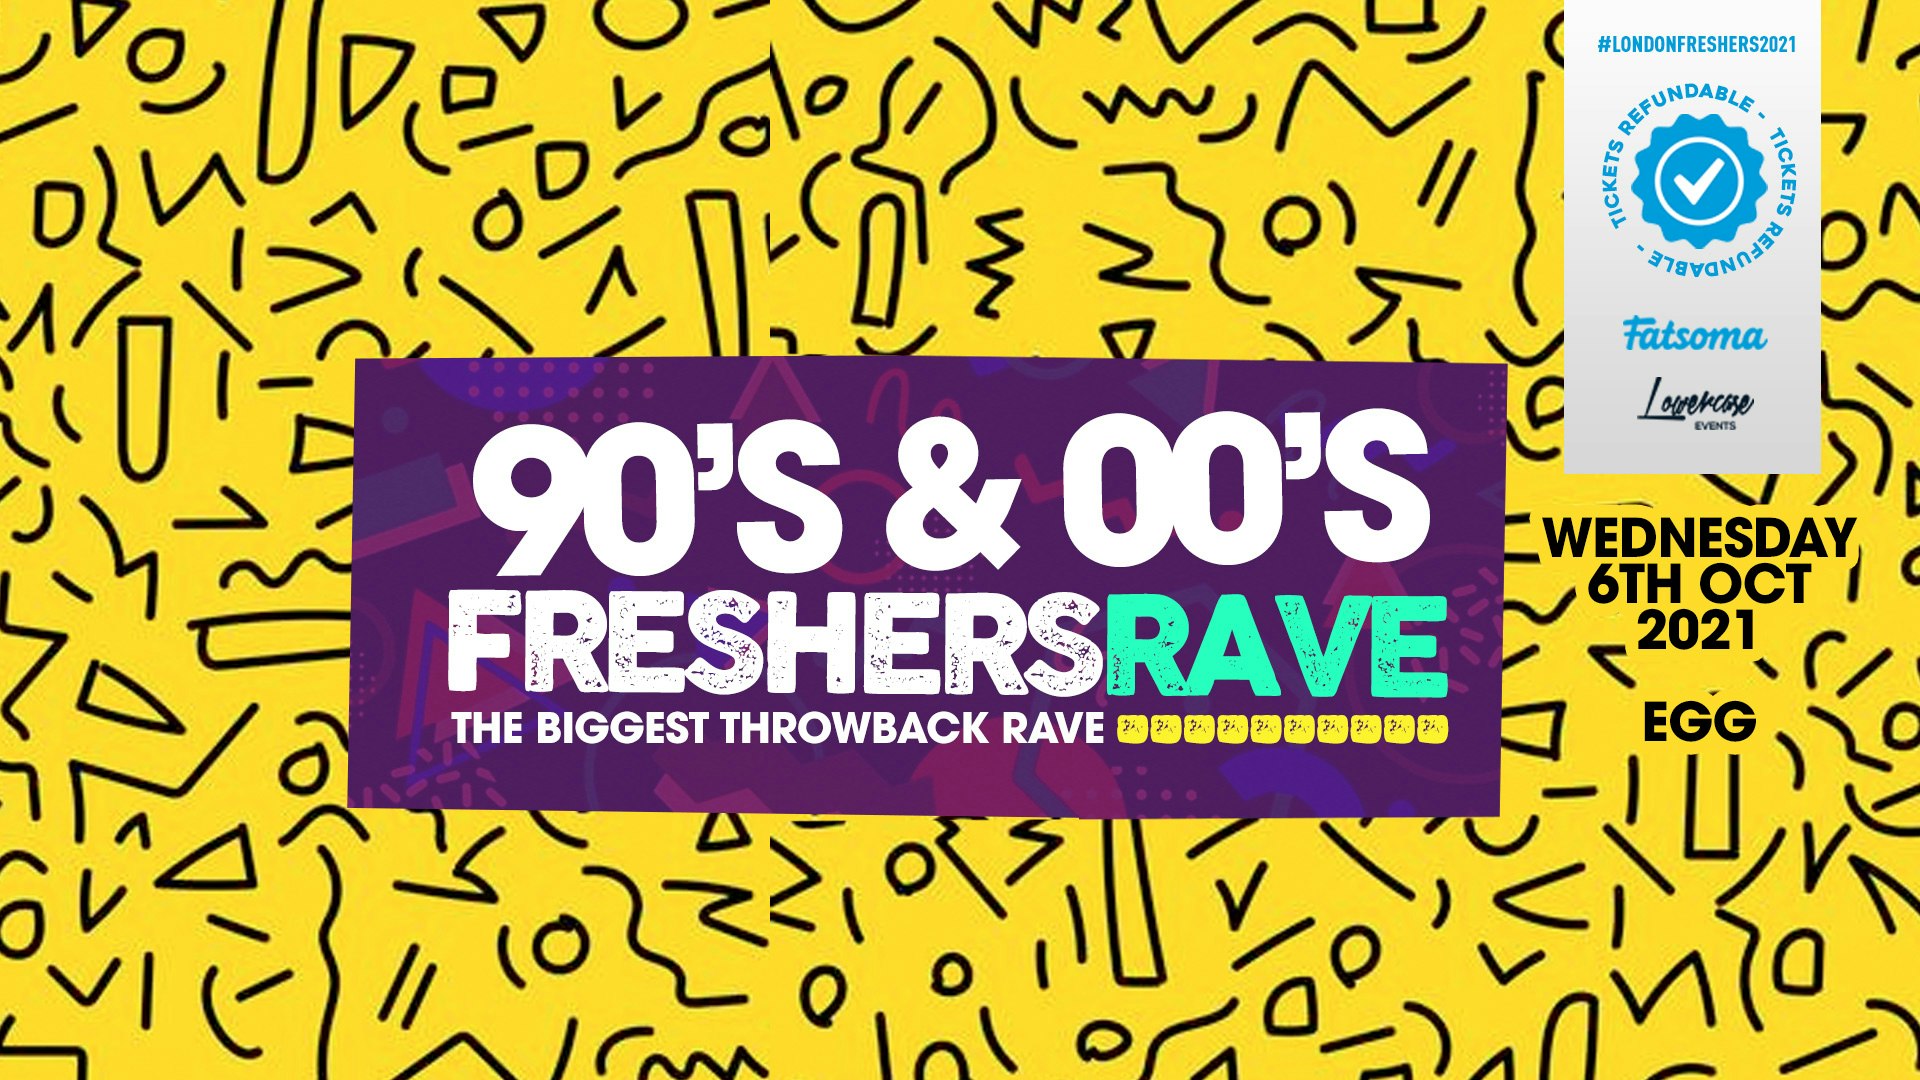 THE 90S & 00S FRESHERS RAVE – THE BIGGEST THROWBACK RAVE! // FRESHERS WEEK 3 DAY 3